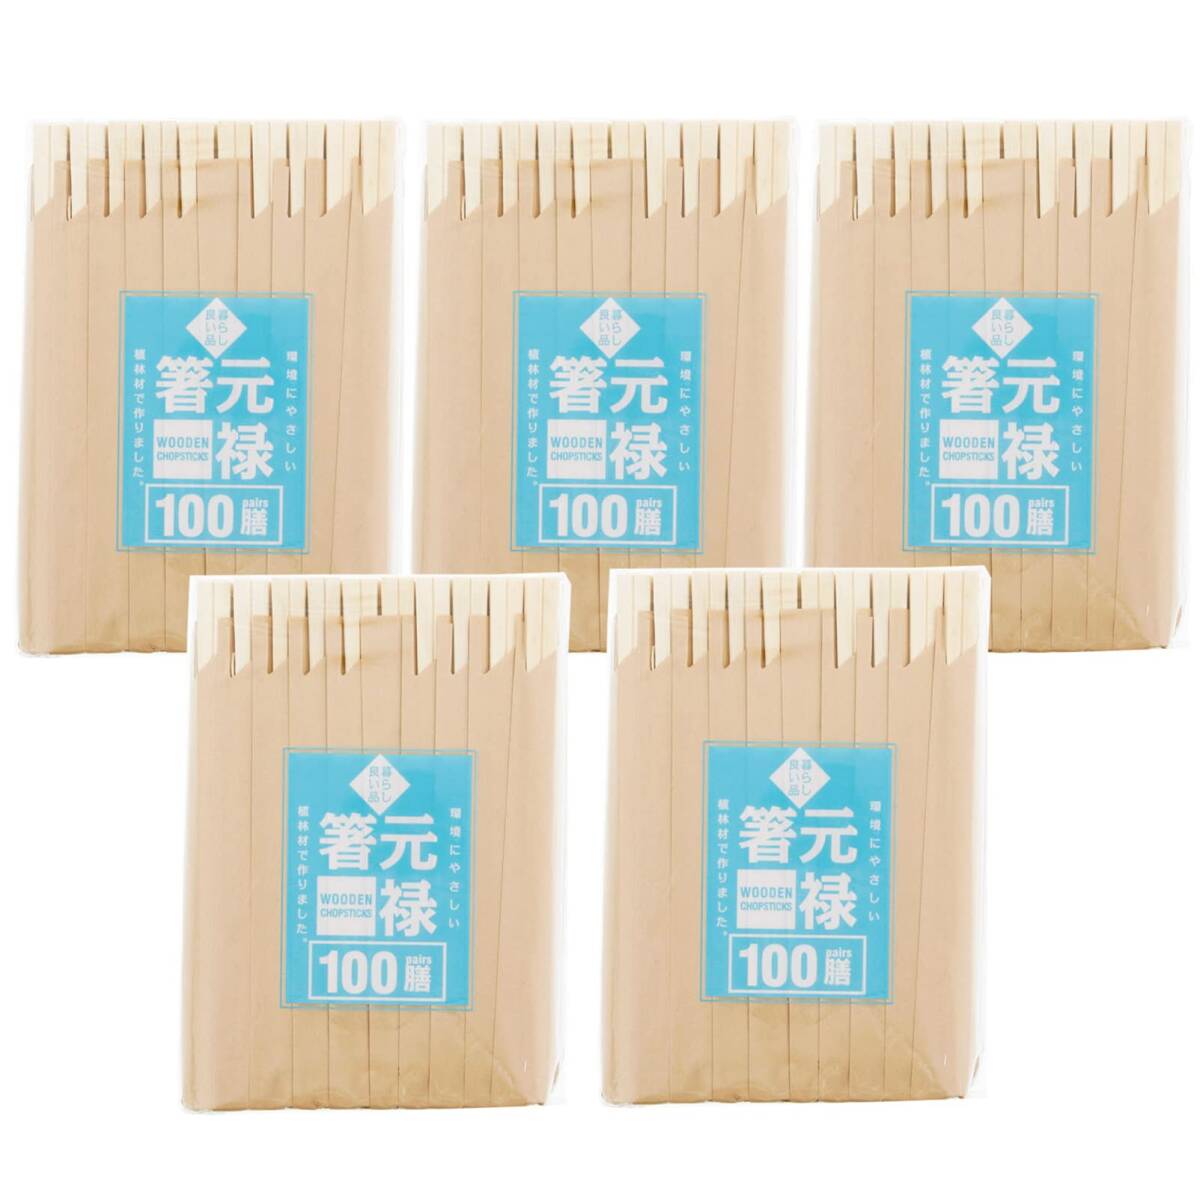 s Lee Cube splittable chopsticks living is good goods business use origin . chopsticks sack entering disposable approximately 20.3cm 100 serving tray go in ×5 set total 500 serving tray 